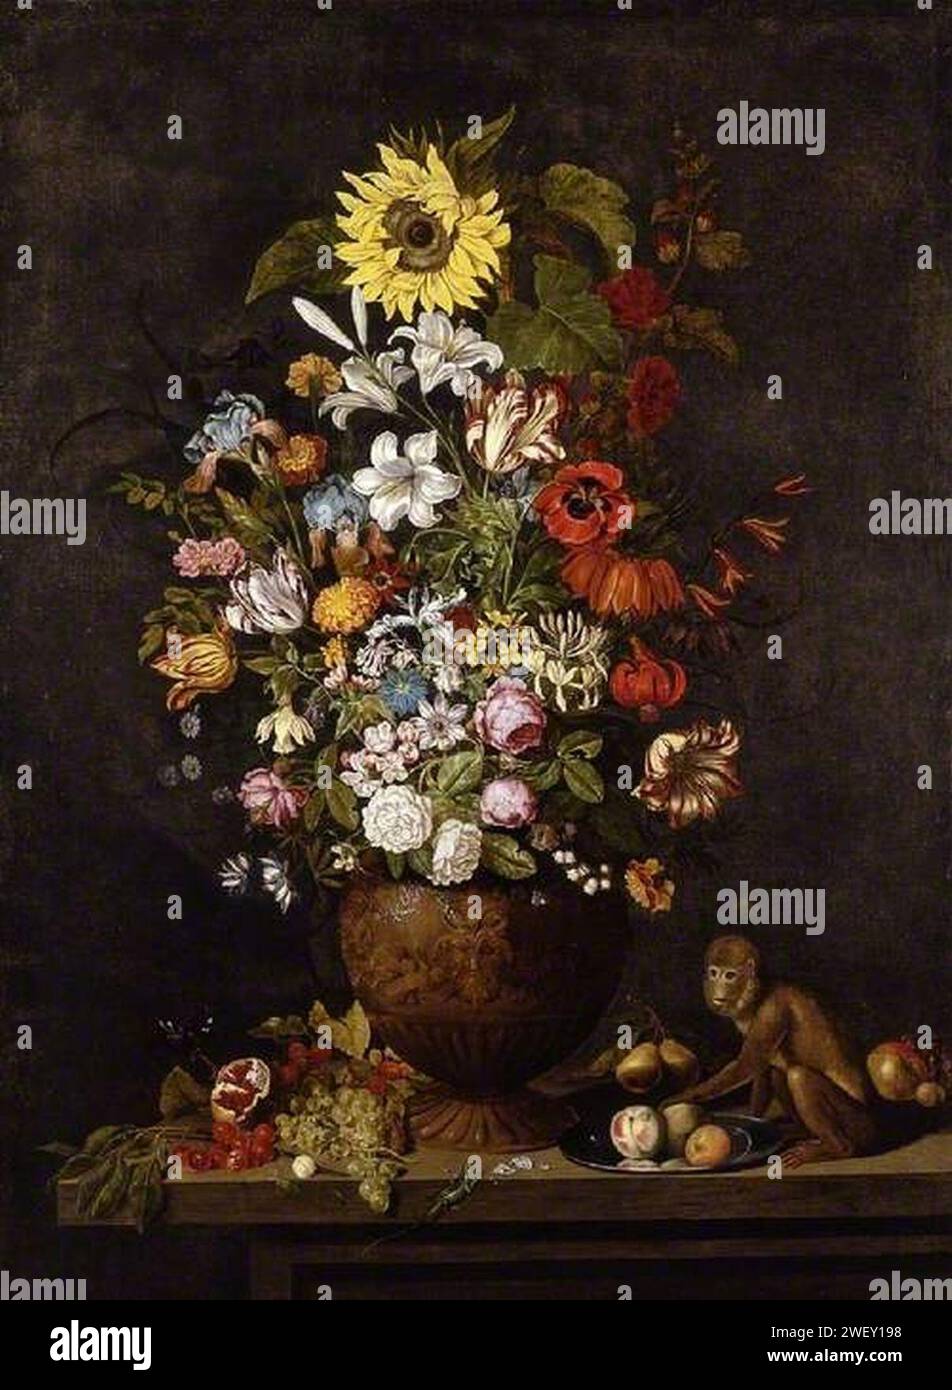 Ambrosius Bosschaert the younger (1609-1645) - A Vase of Flowers with a Monkey Stock Photo